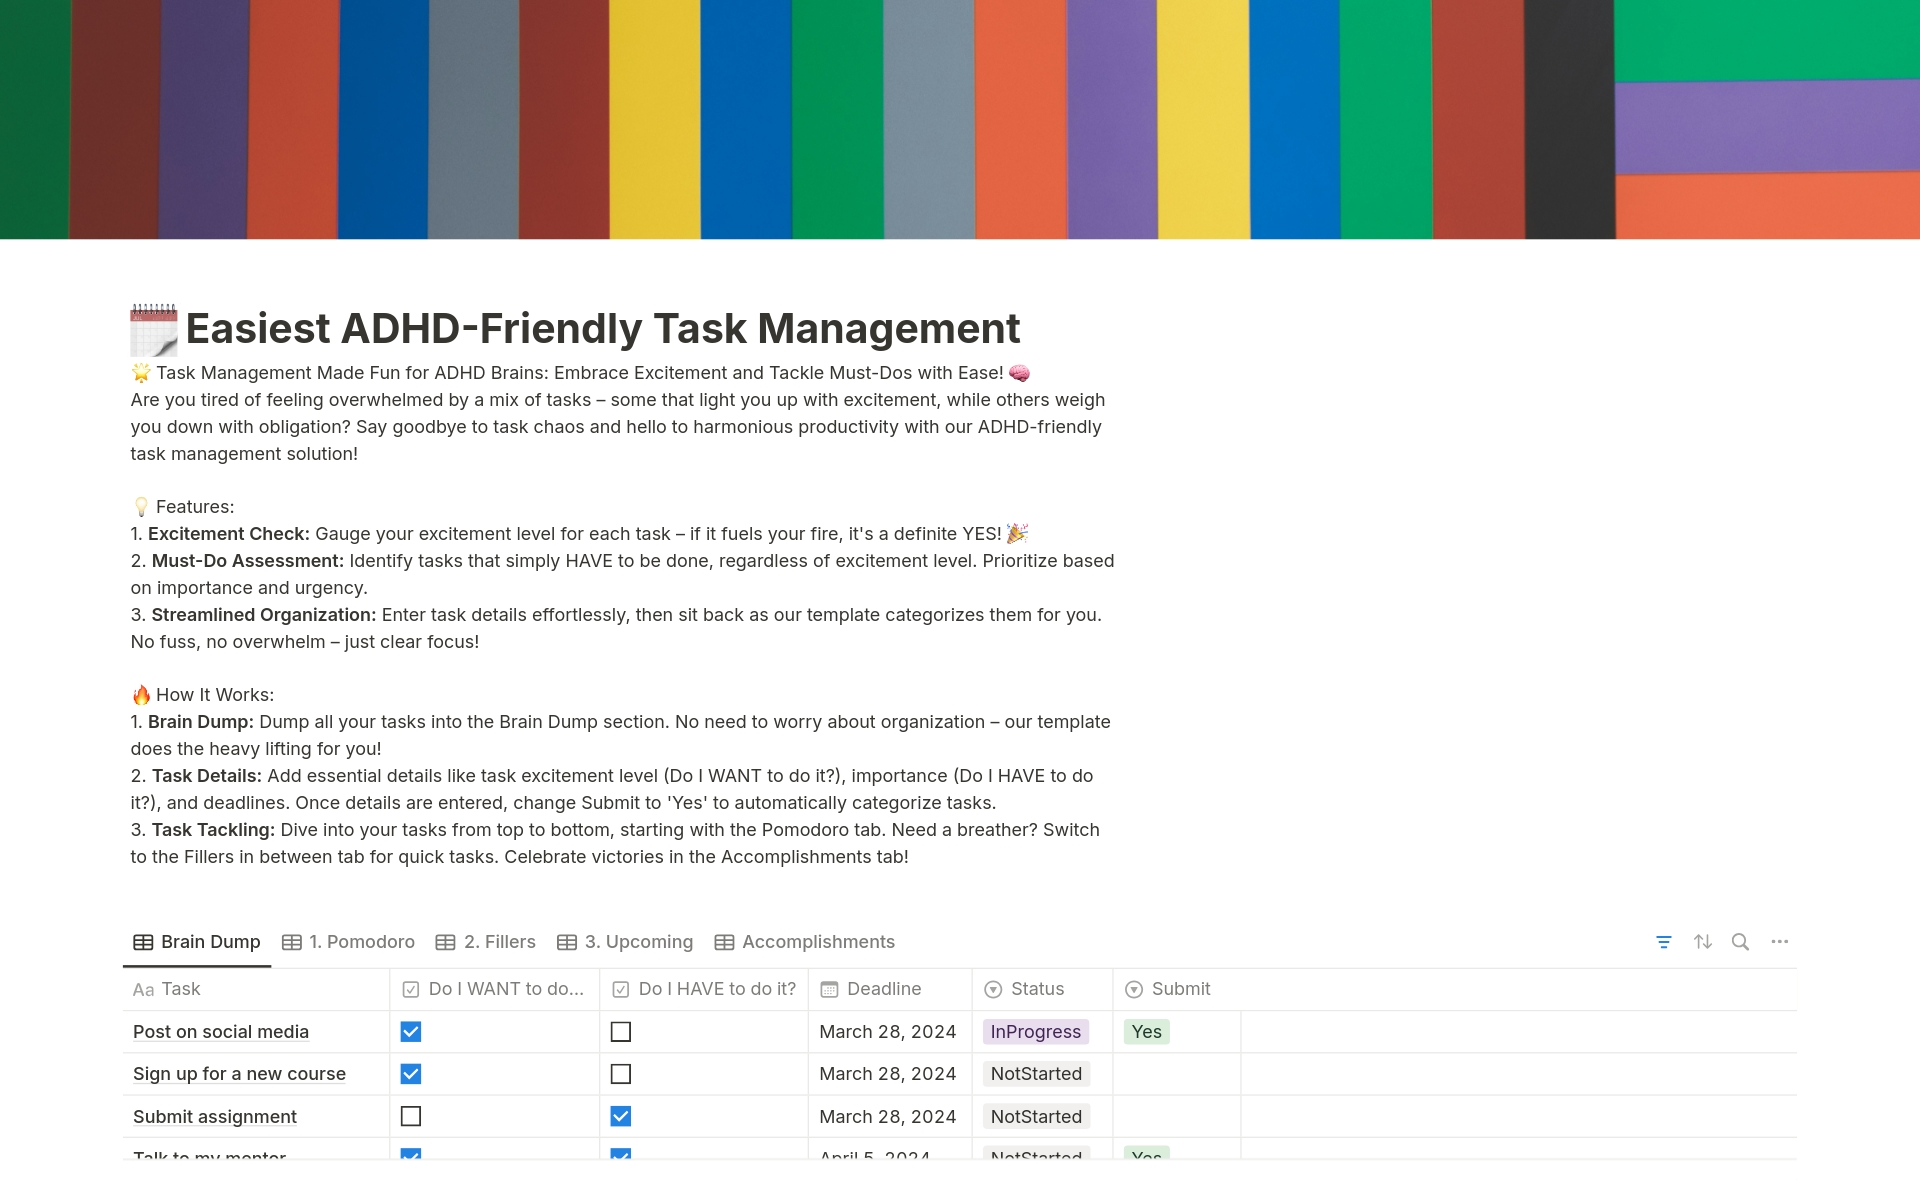 Are you tired of feeling overwhelmed by complicated task management systems that seem more like a chore than a solution? Say goodbye to stress and hello to simplicity with our easy-to-use Notion template designed specifically with ADHD individuals in mind.